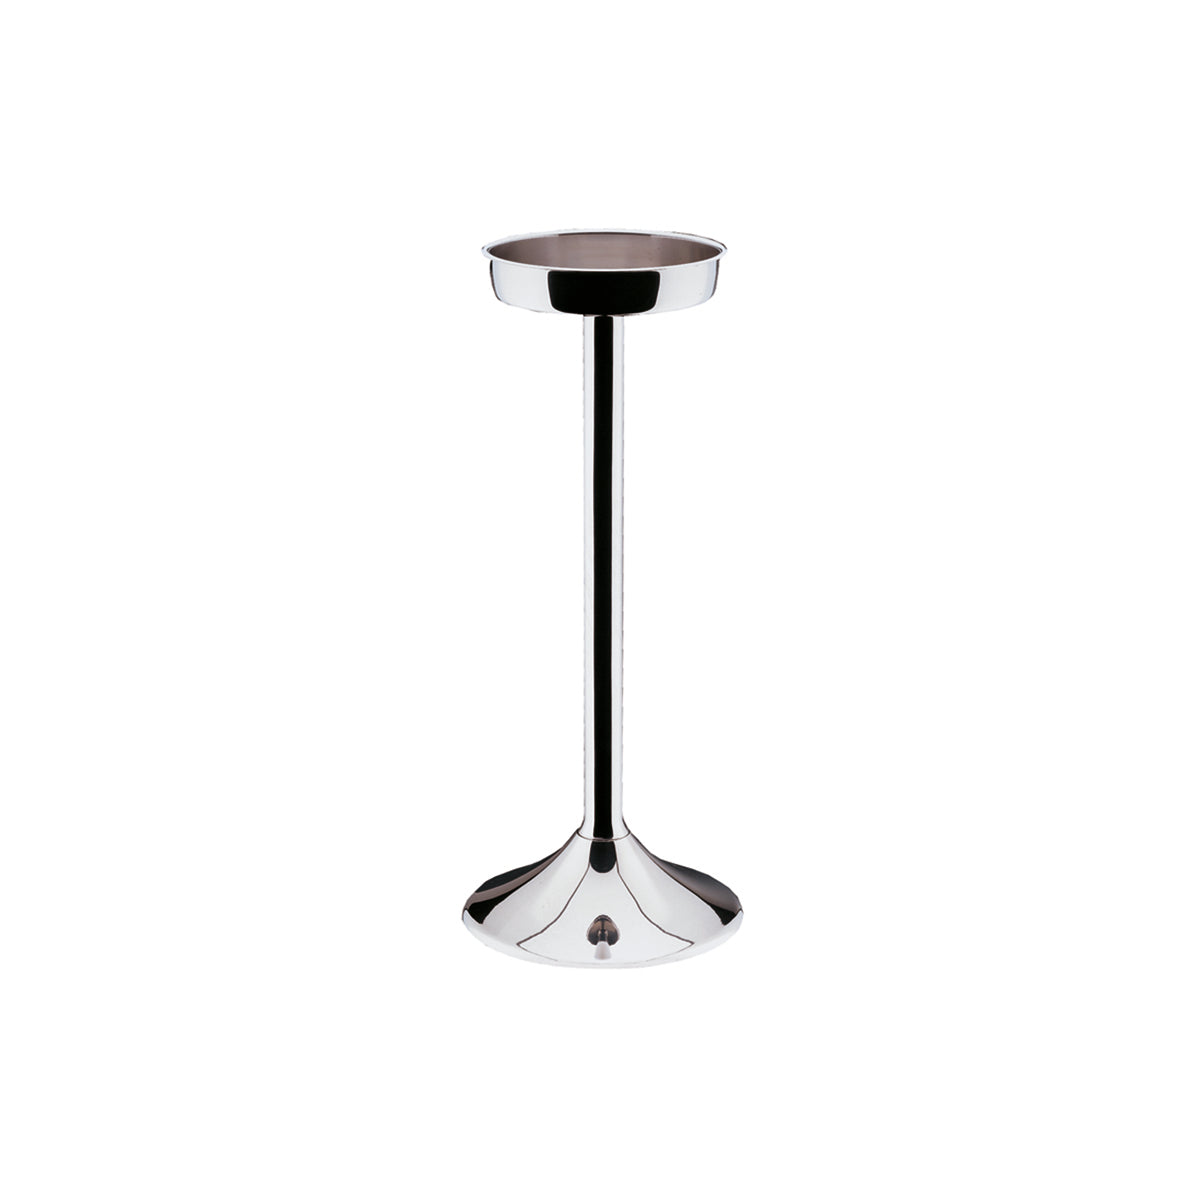 06.8452.6040 WMF Neutral Wine Cooler Stand 200x600mm Stainless Steel Tomkin Australia Hospitality Supplies